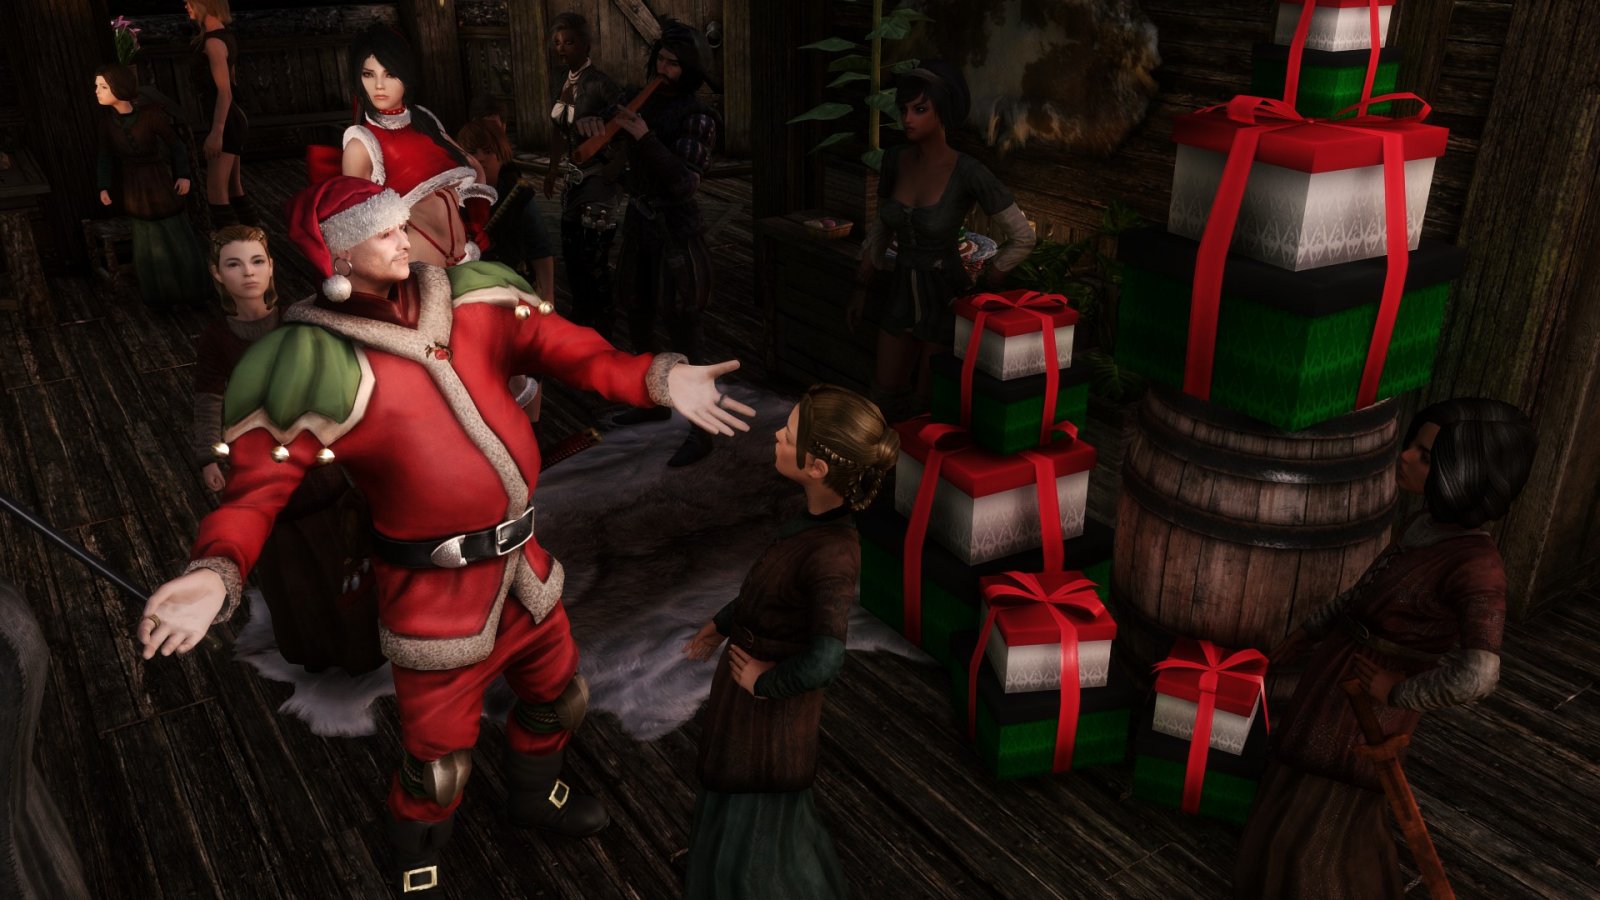 "Yup!  We've got presents for everyone!"